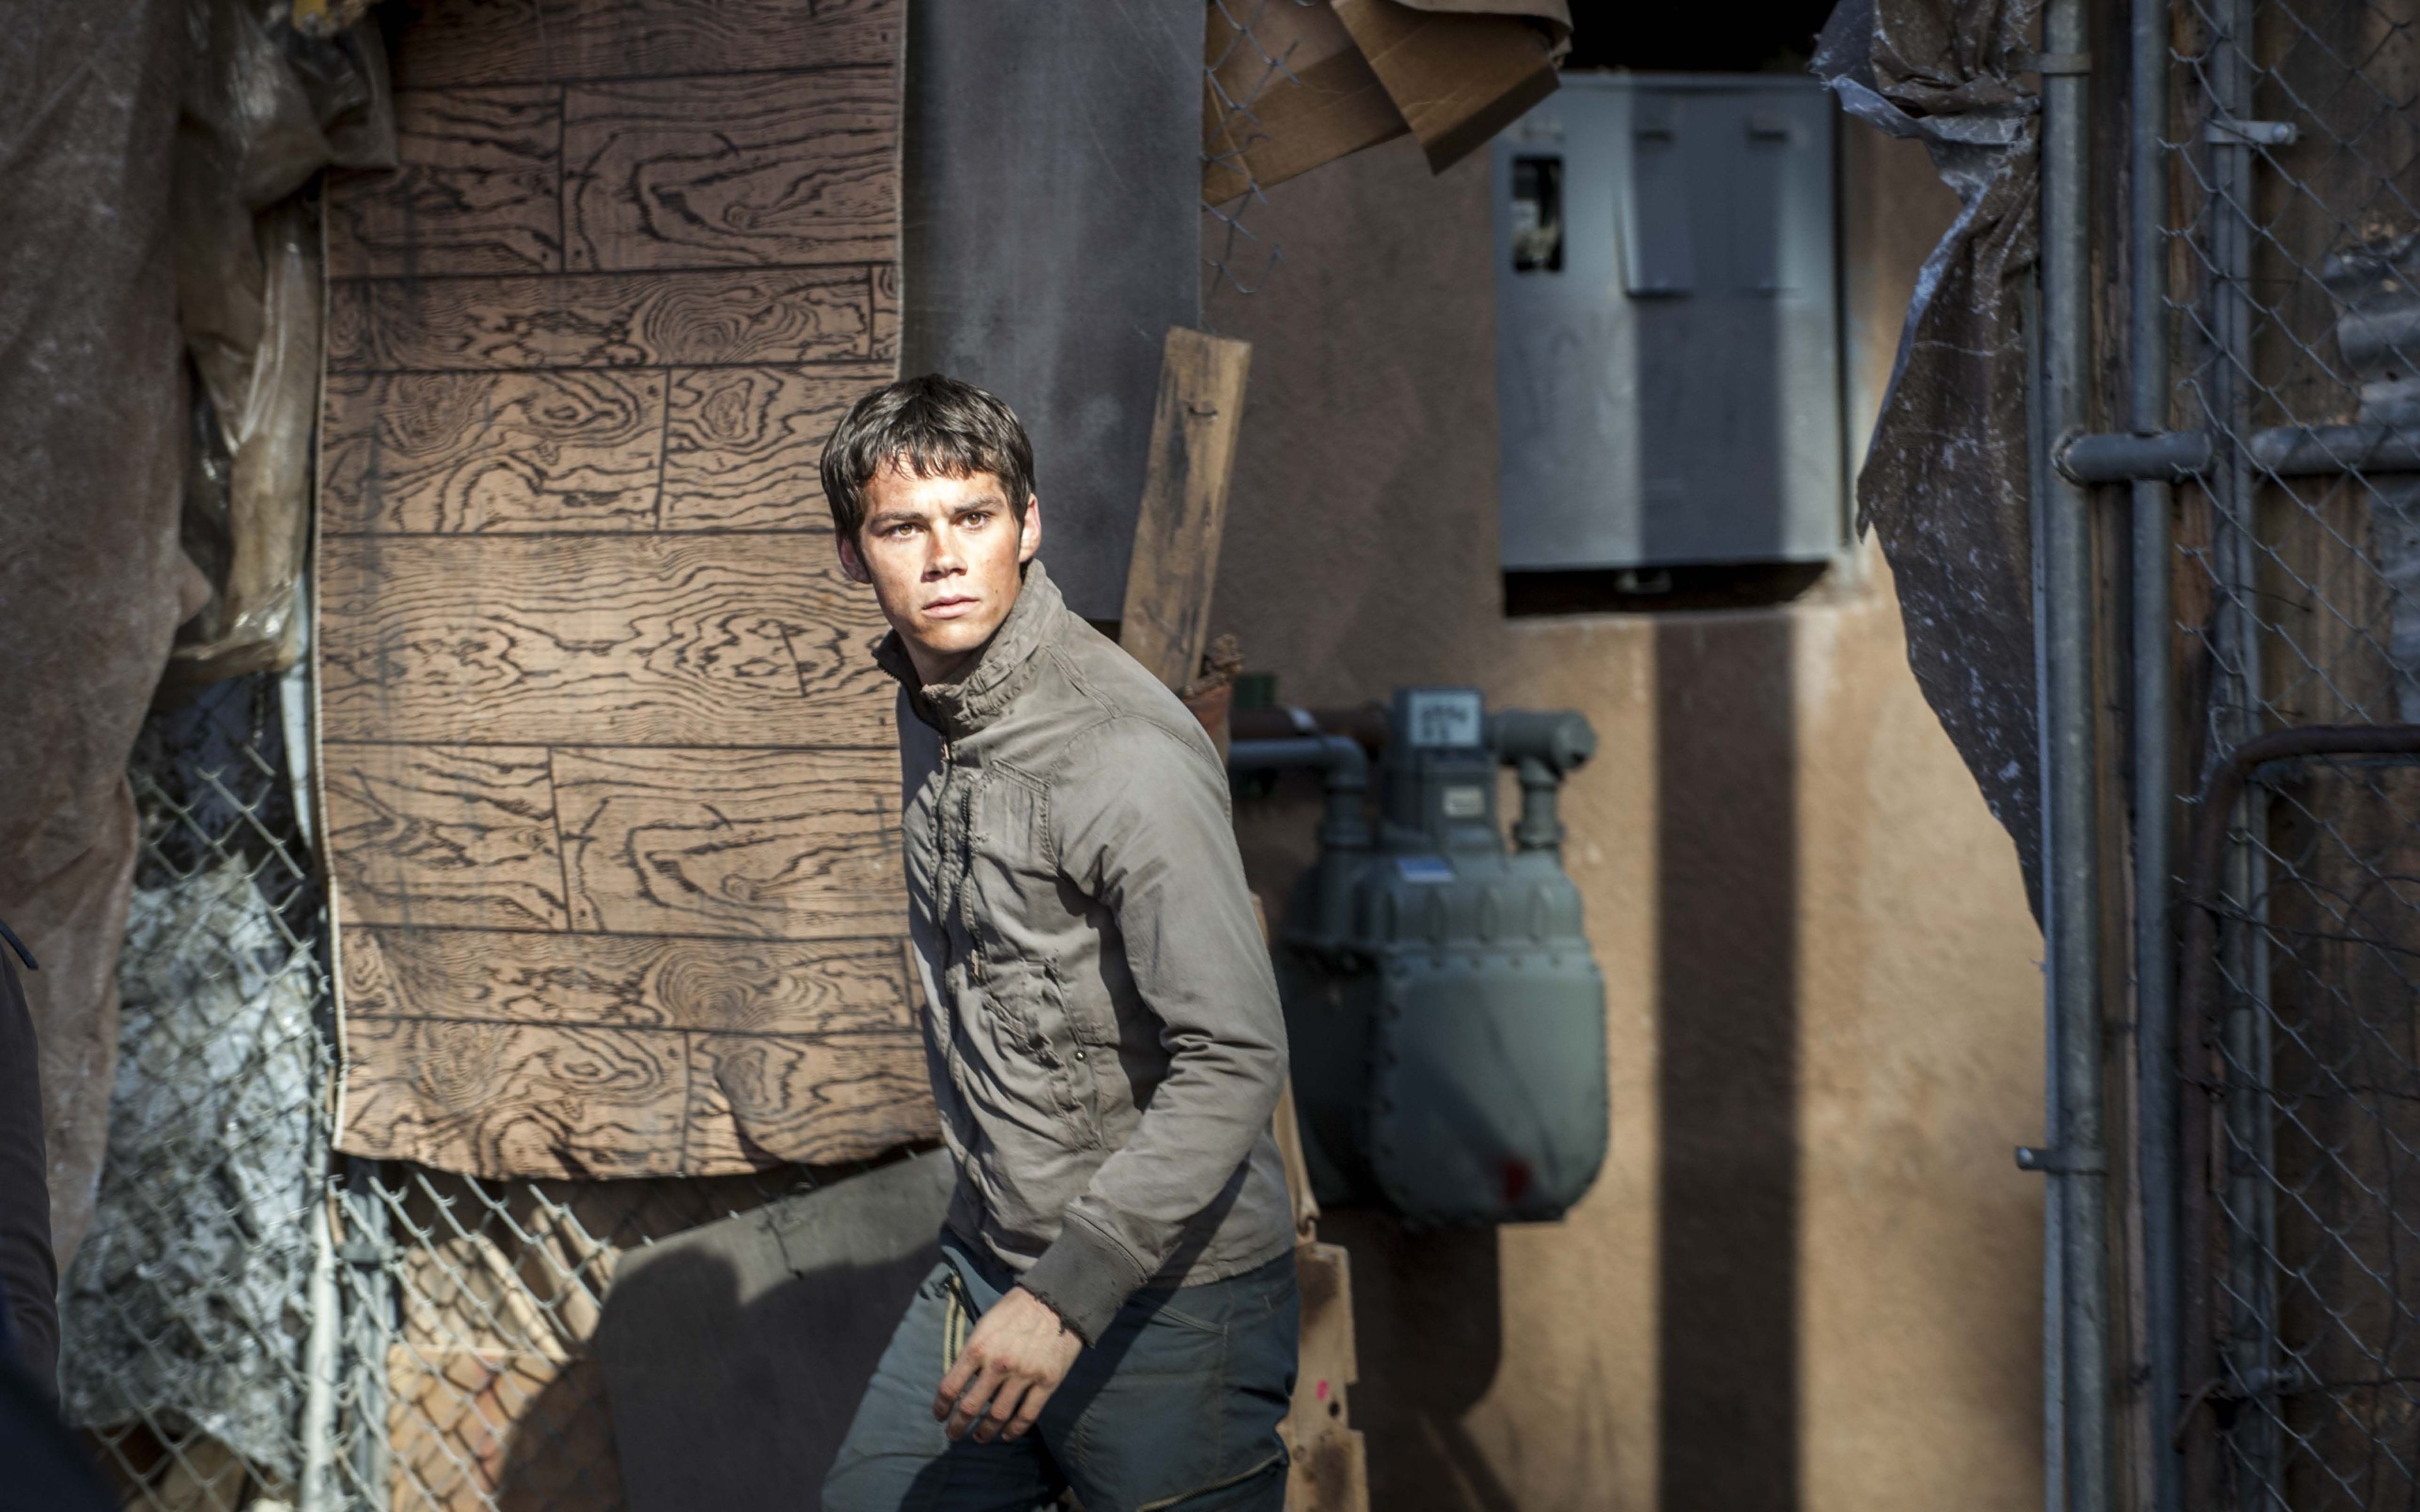 Maze Runner The Scorch Trials: Thomas for 3840 x 2400 Widescreen resolution